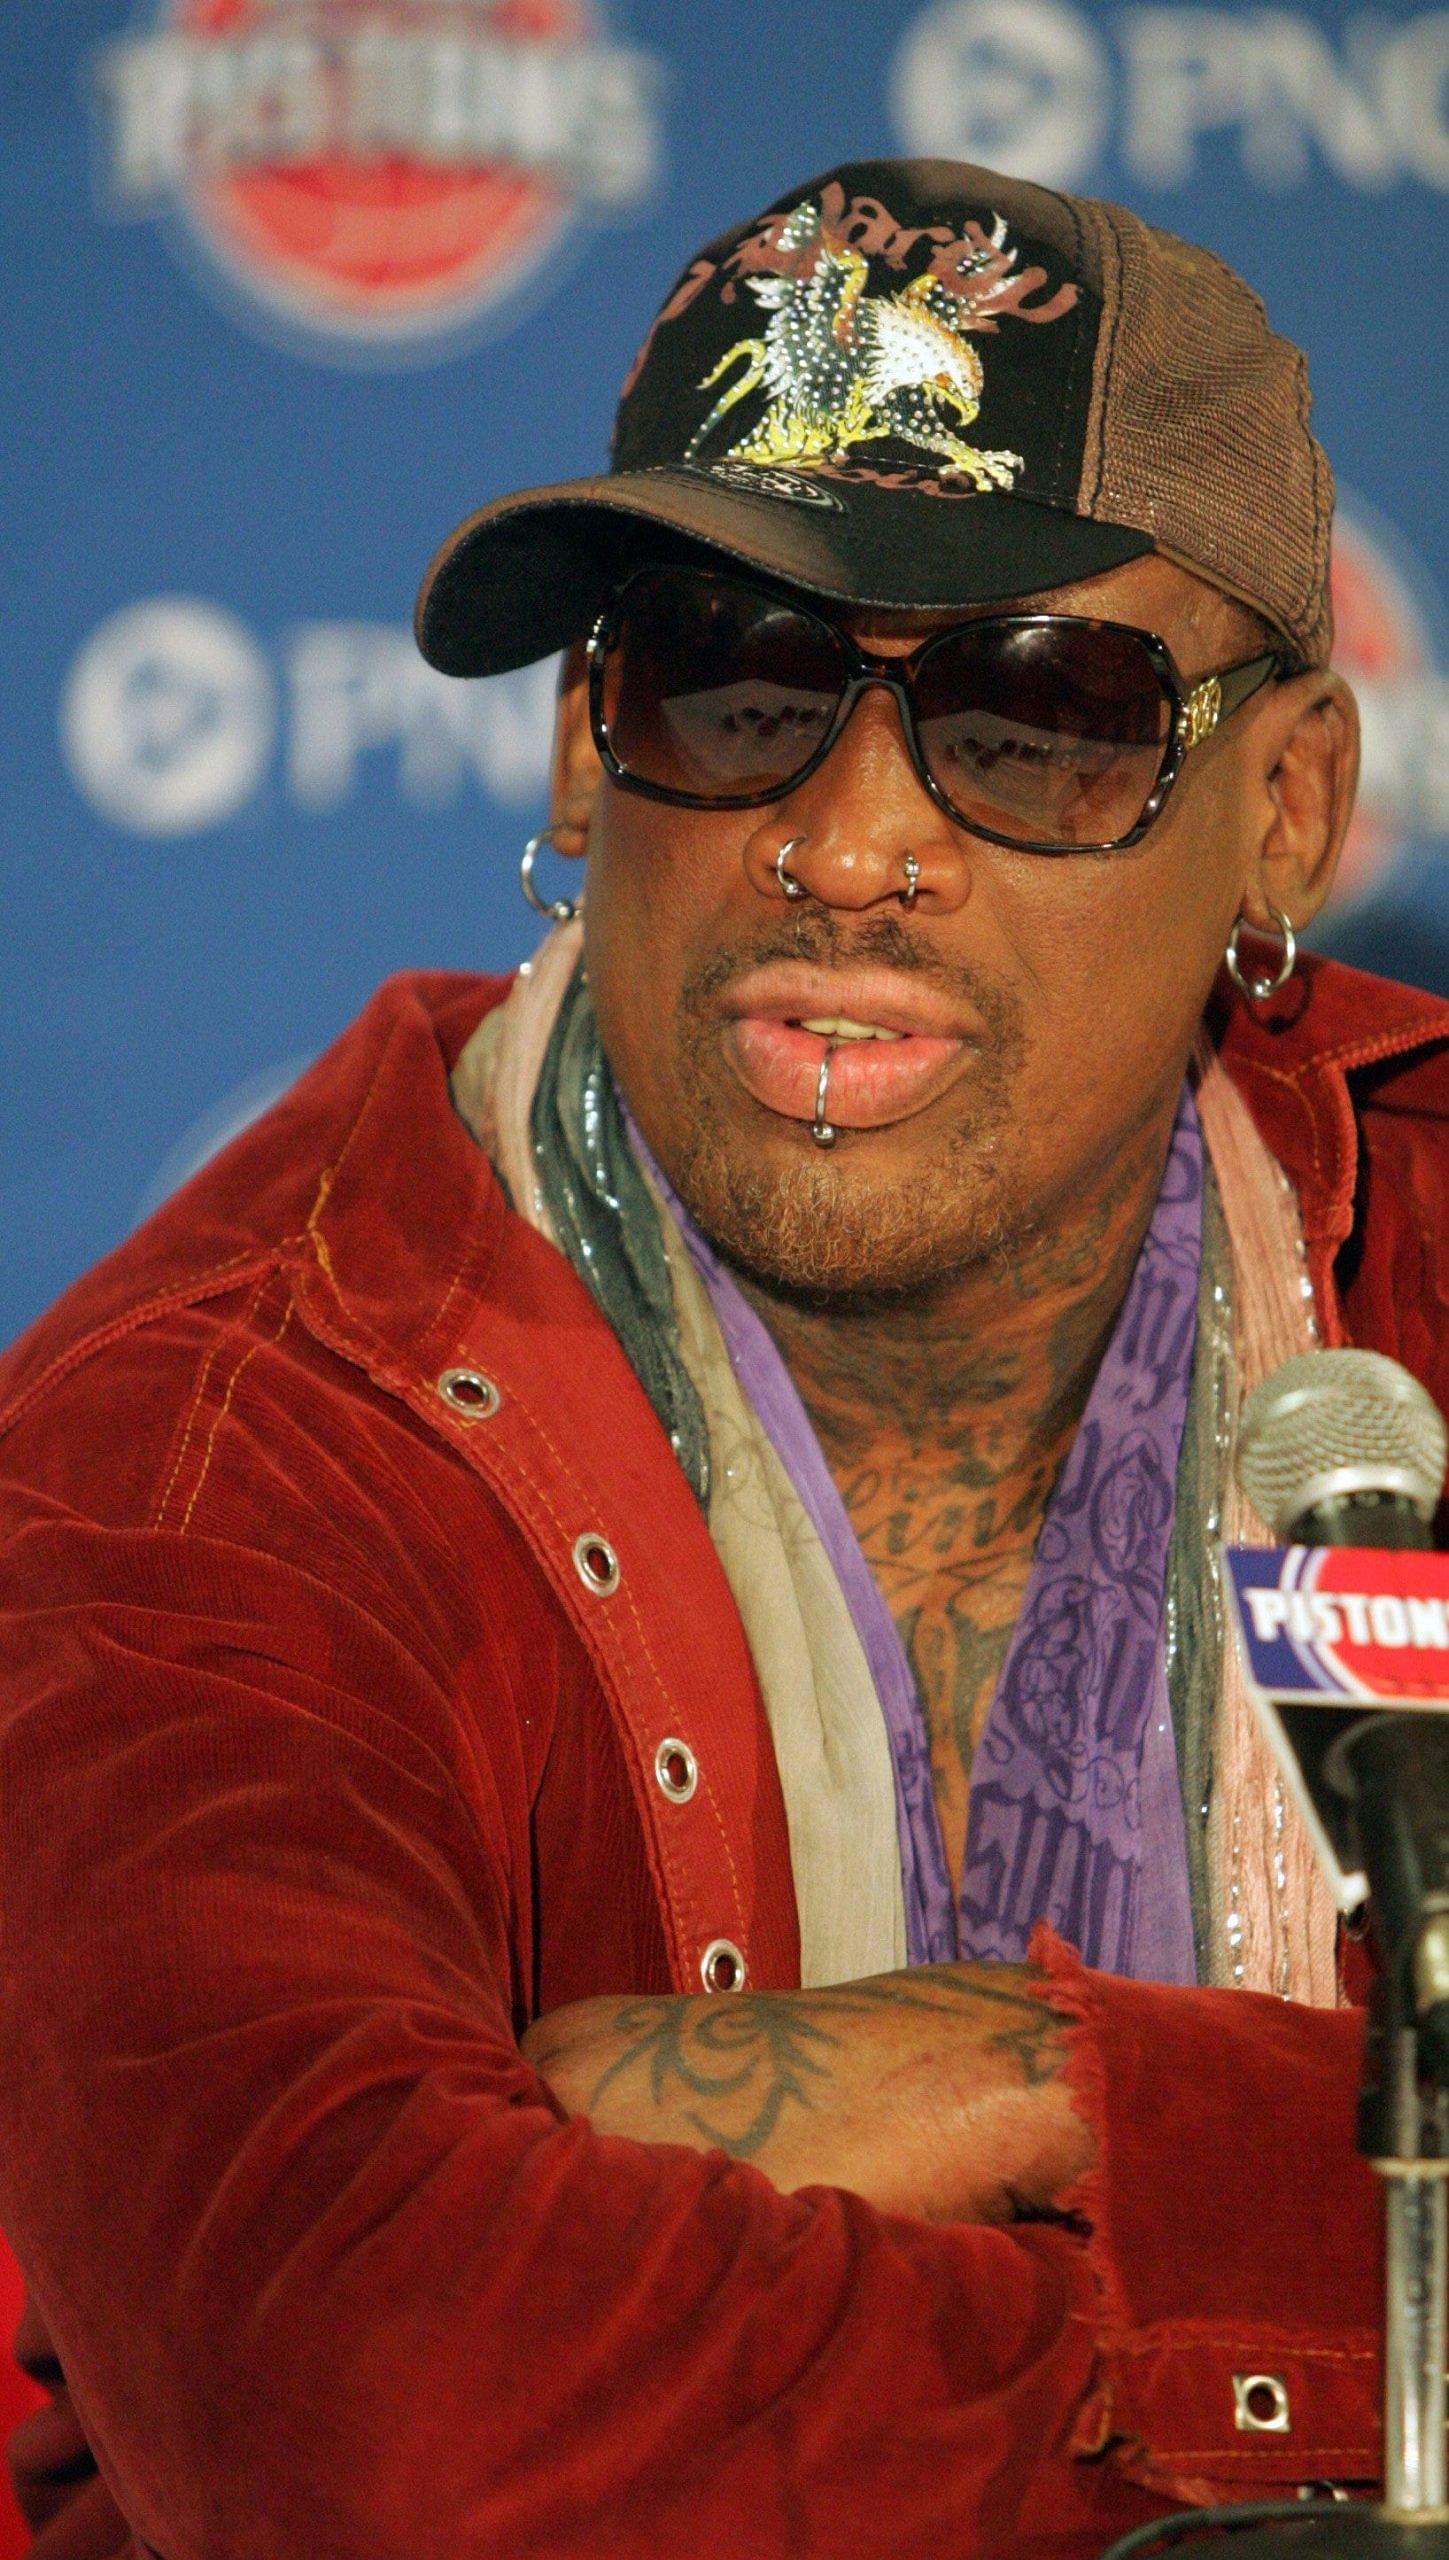 "Dennis Rodman and I Never Dated!": Hollywood Actress Once Profusely Denied Being Involved With 'The Worm' Despite Oscar's Appearance